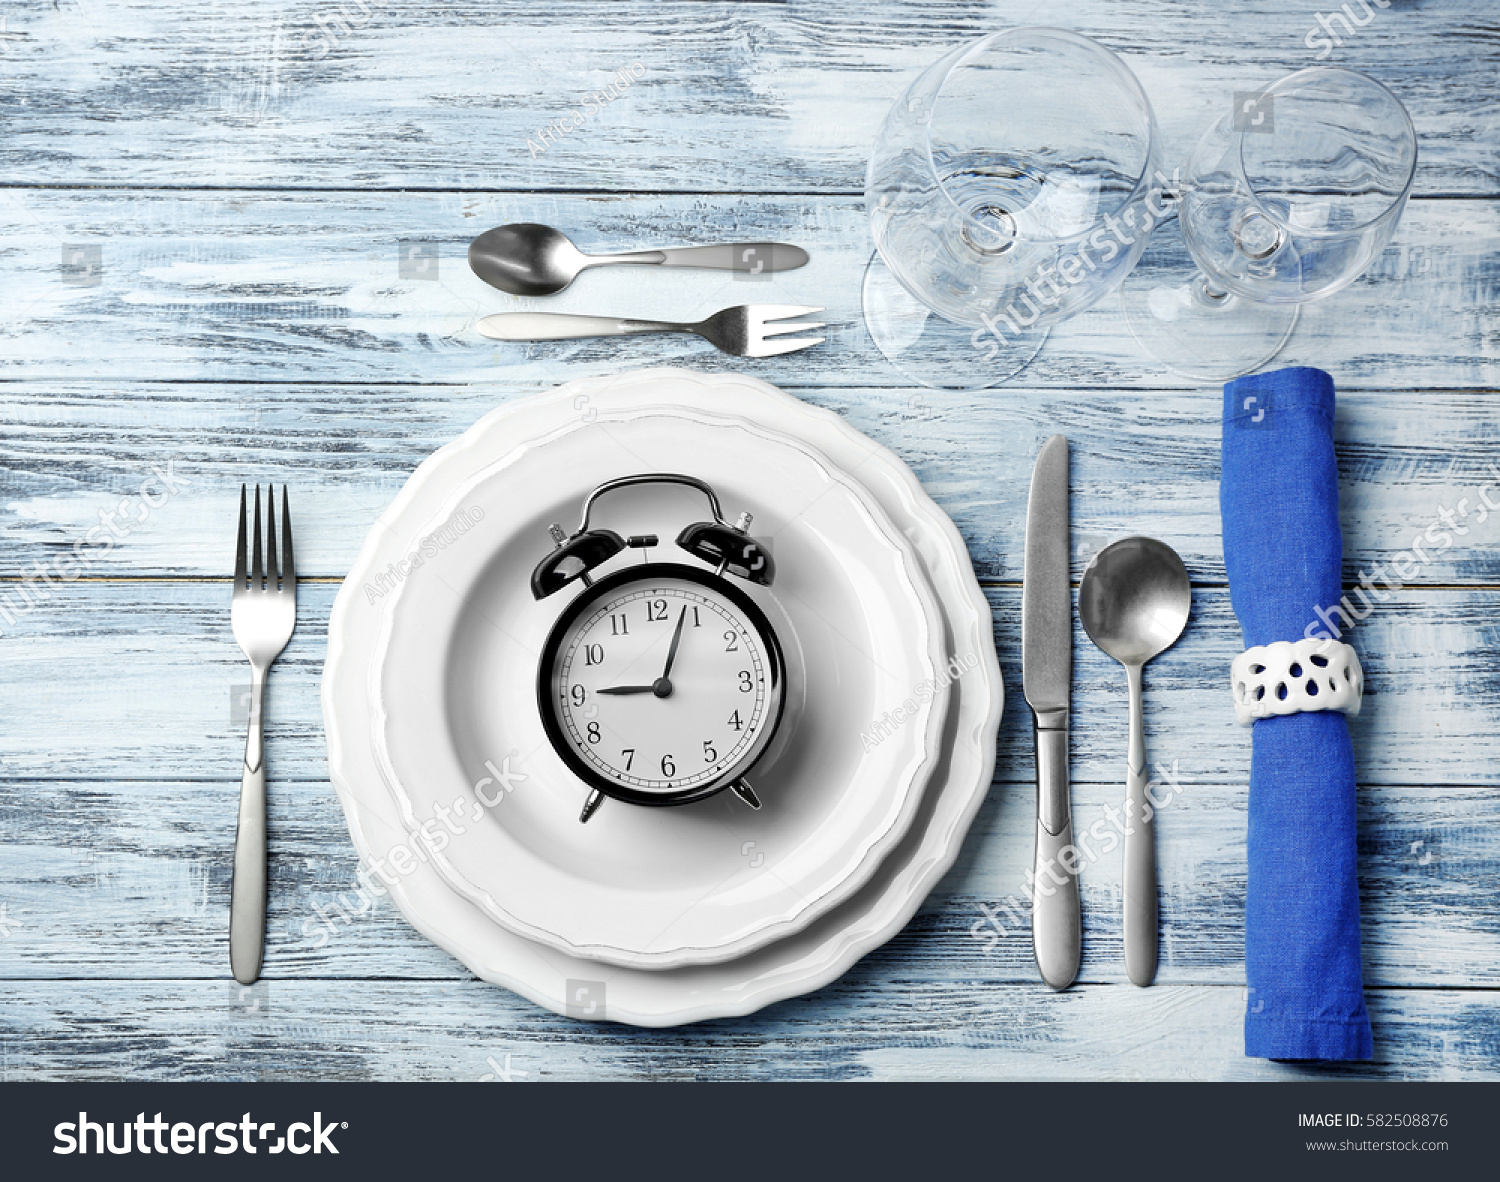 Alarm clock in empty plate on wooden background #582508876